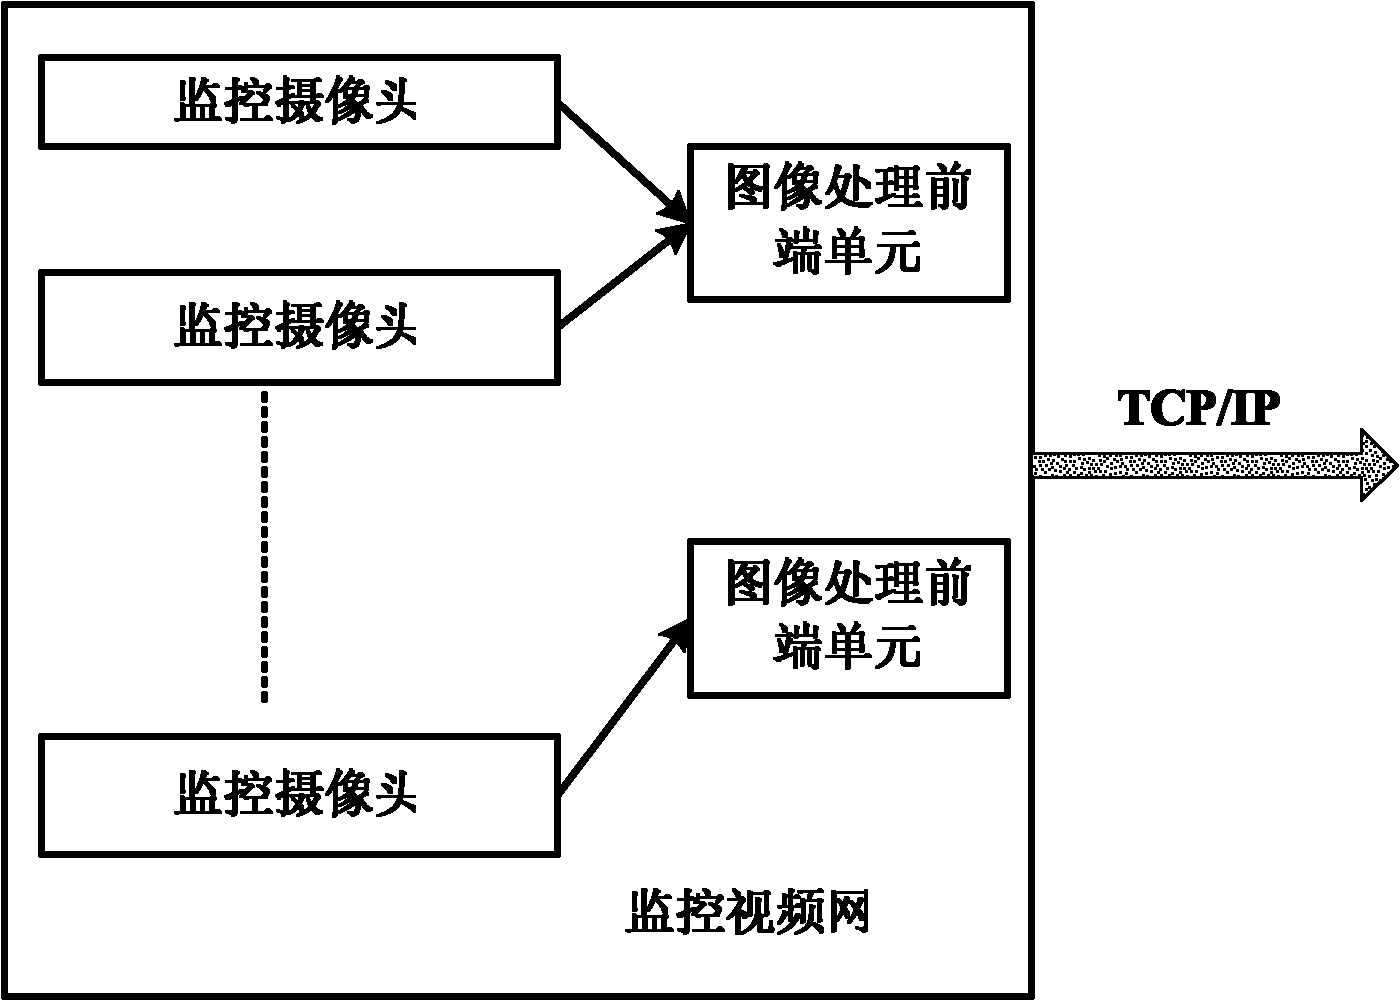 Target image identification system and method